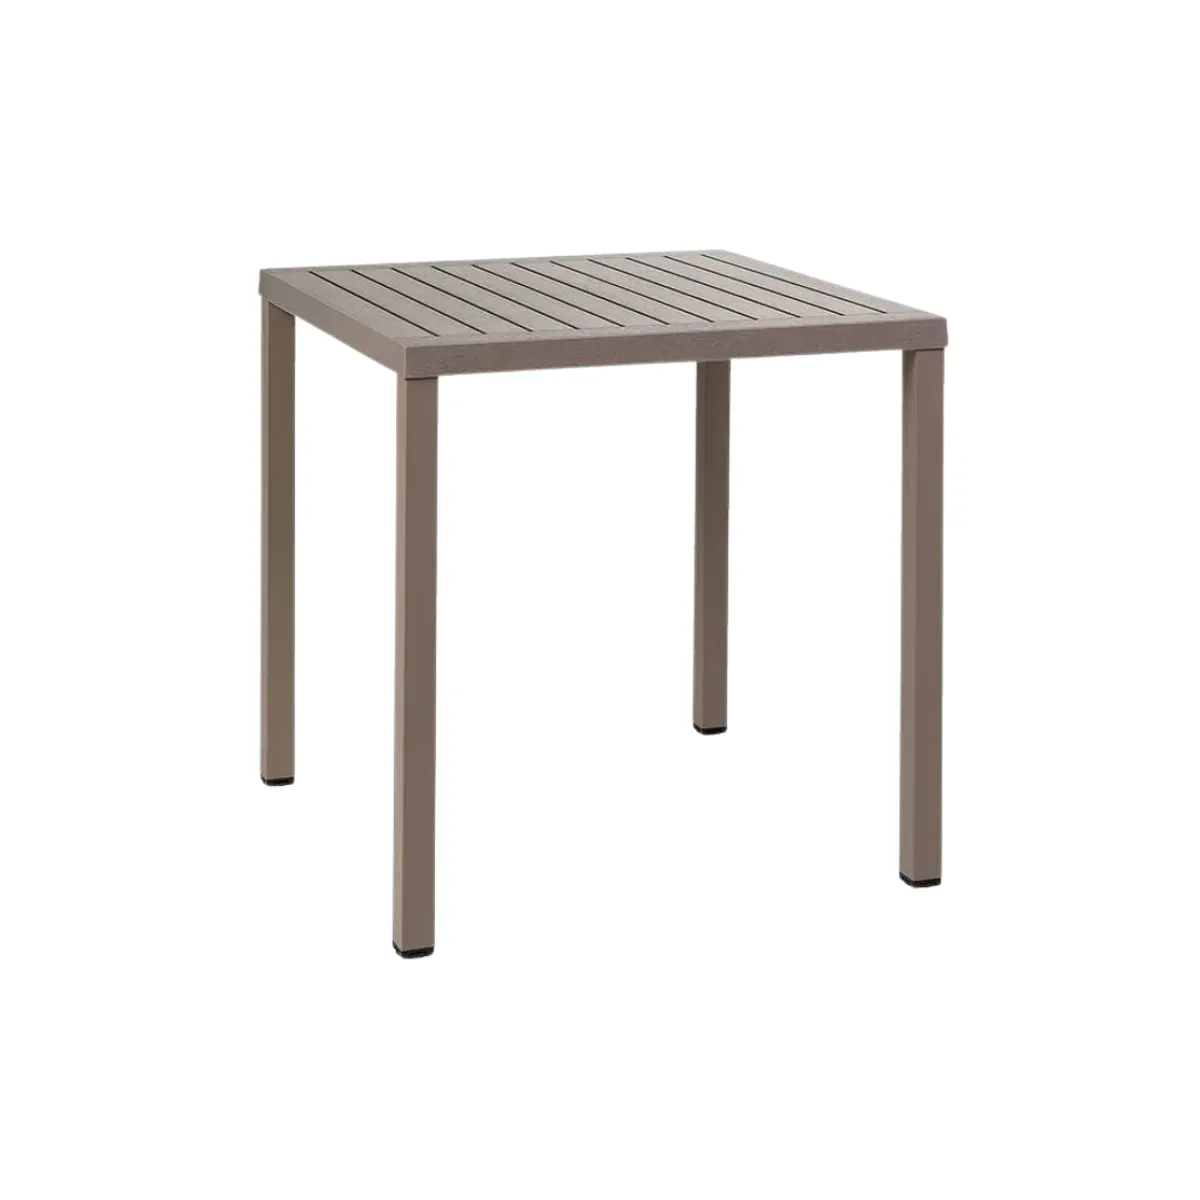 Boid square table 2